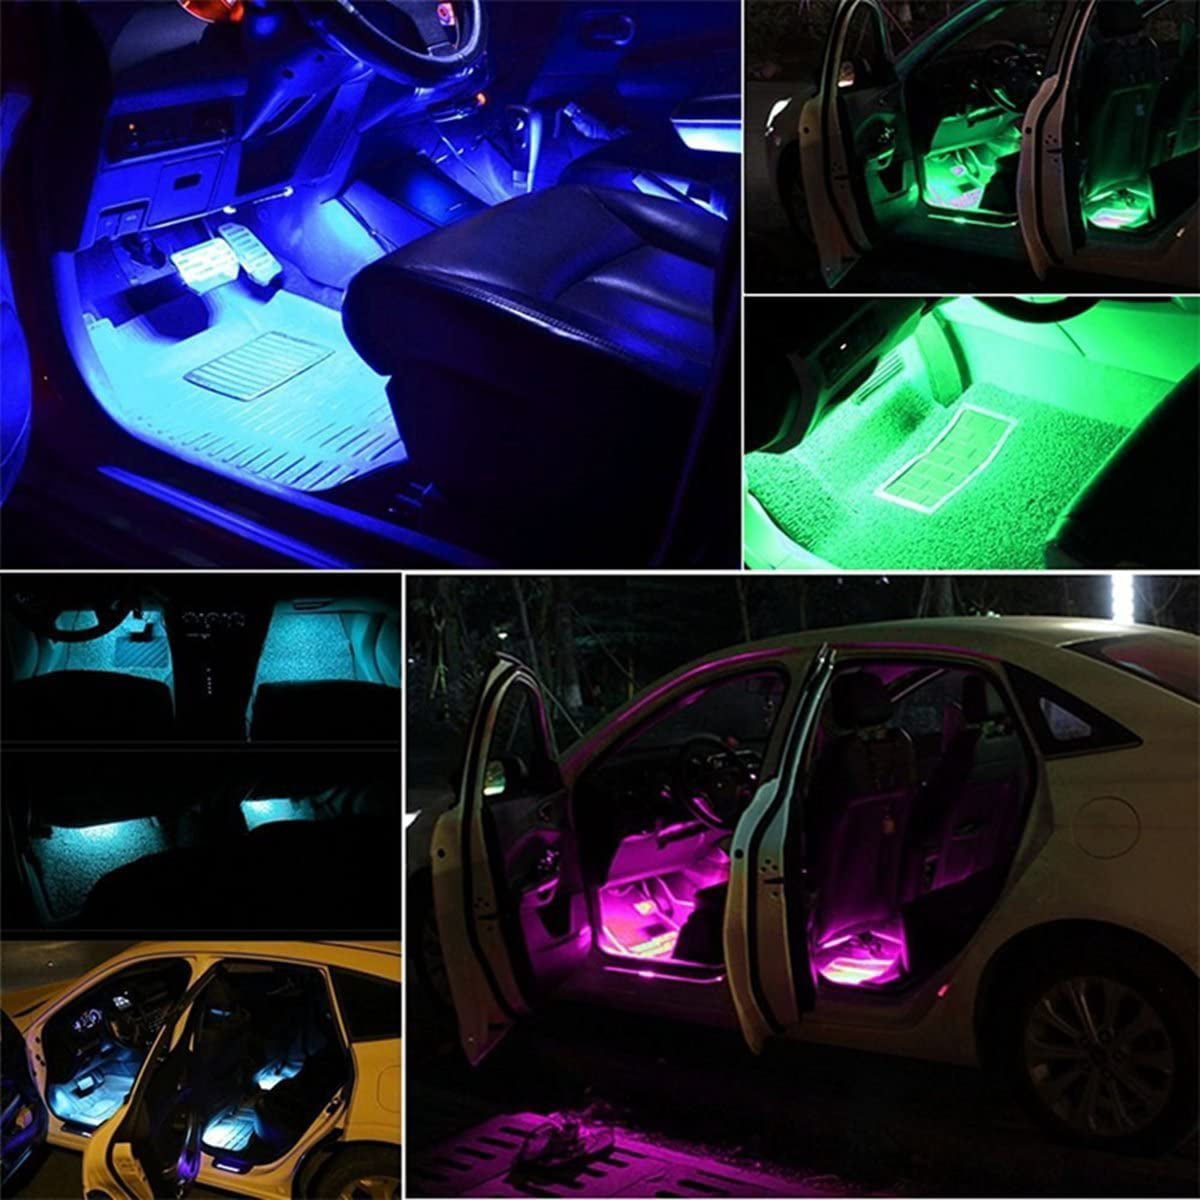 Amon Tech Car LED Strip Light 4Pcs 36 LED DC 12V Multicolor Music Car Interior Lights RGB Under Dash Lighting with Sound Active Function and Wireless Remote Control Car Interior Decoration Lights 